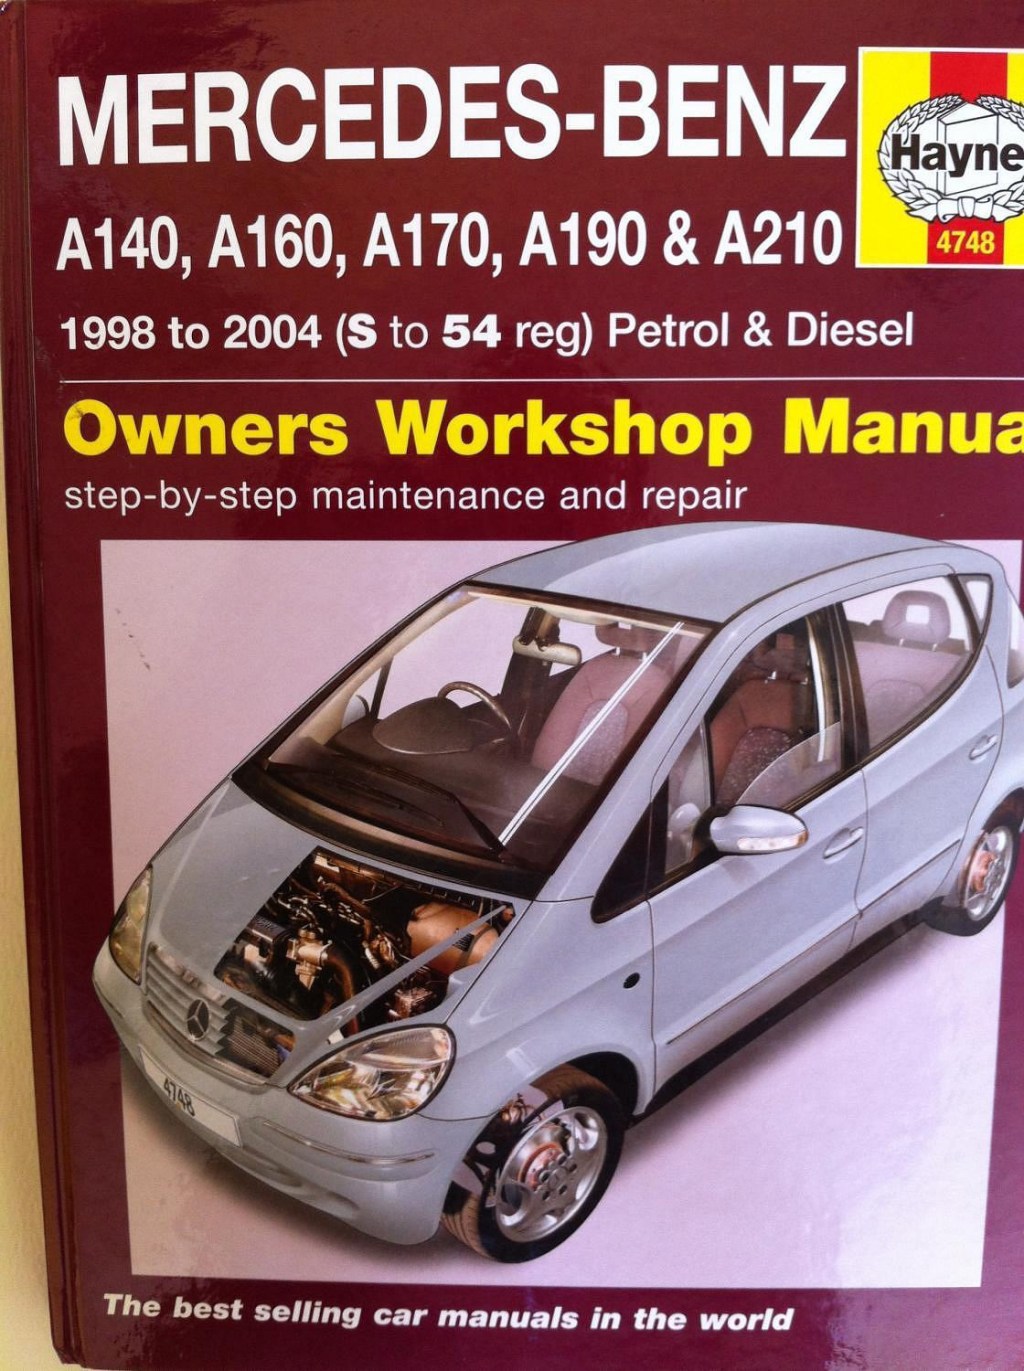 Picture of: MERCEDES-BENZ A-CLASS OWNERS WORKSHOP MANUAL